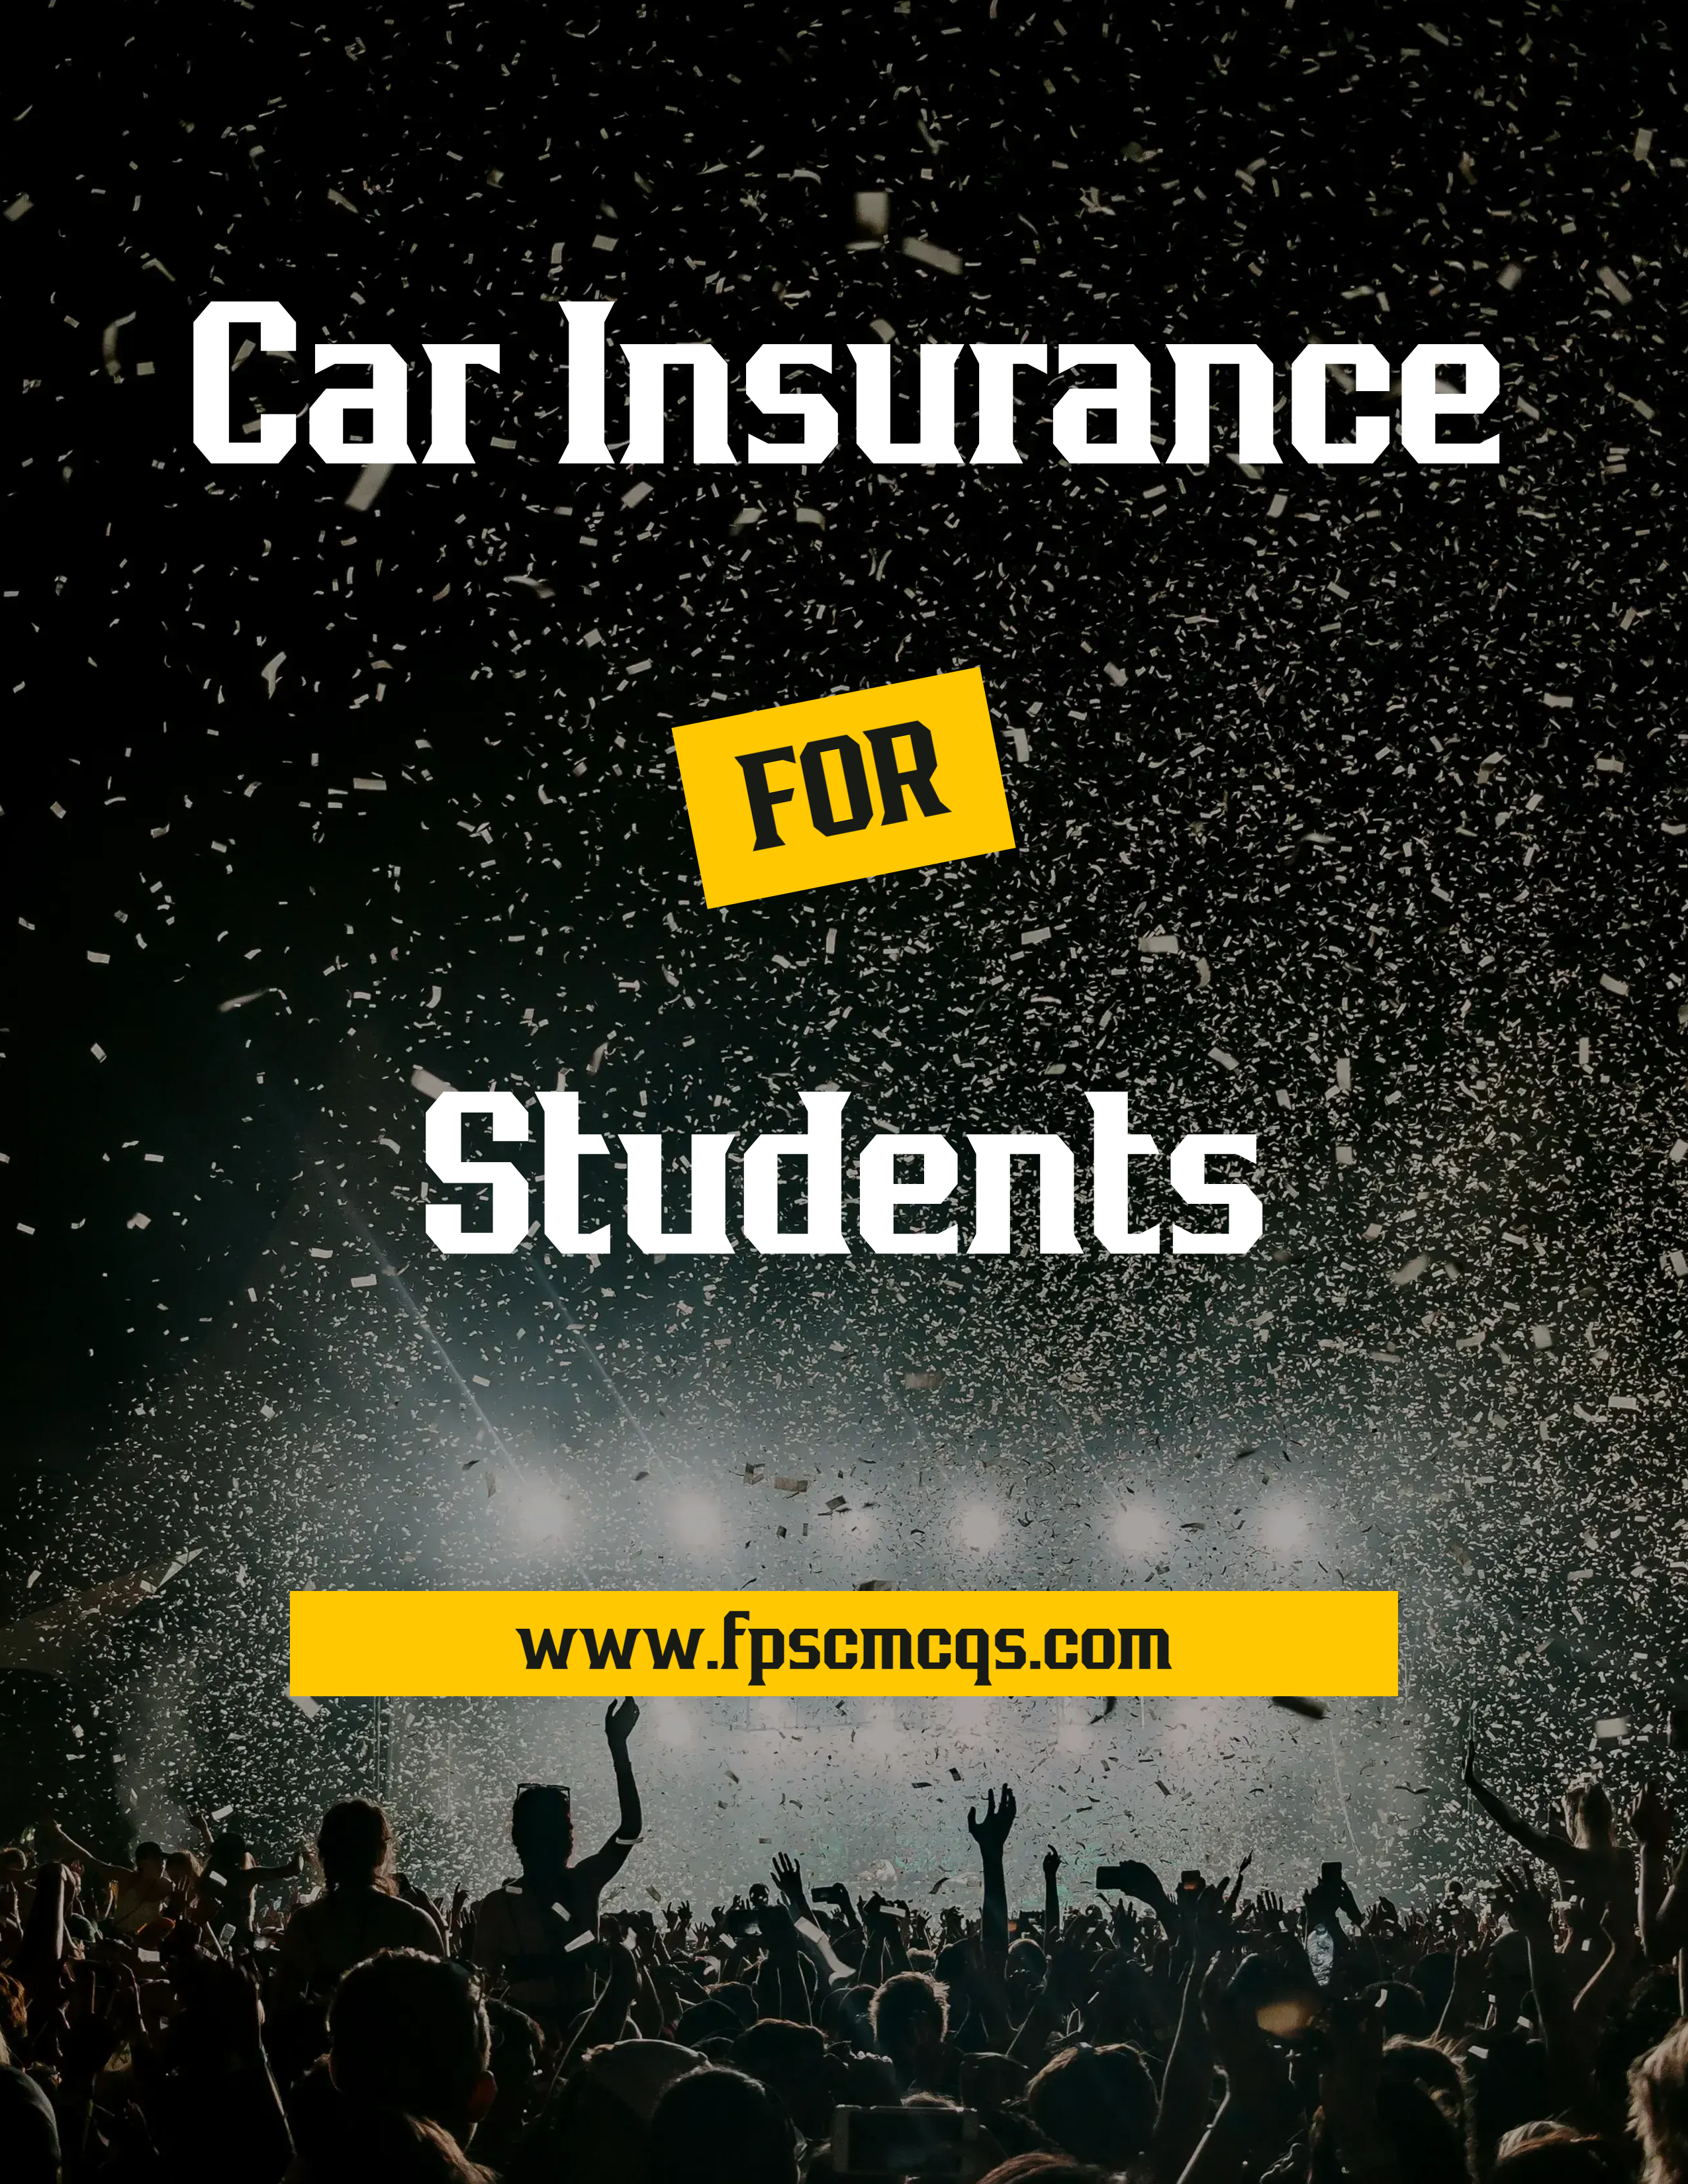 Why should car insurance be lowered for students?